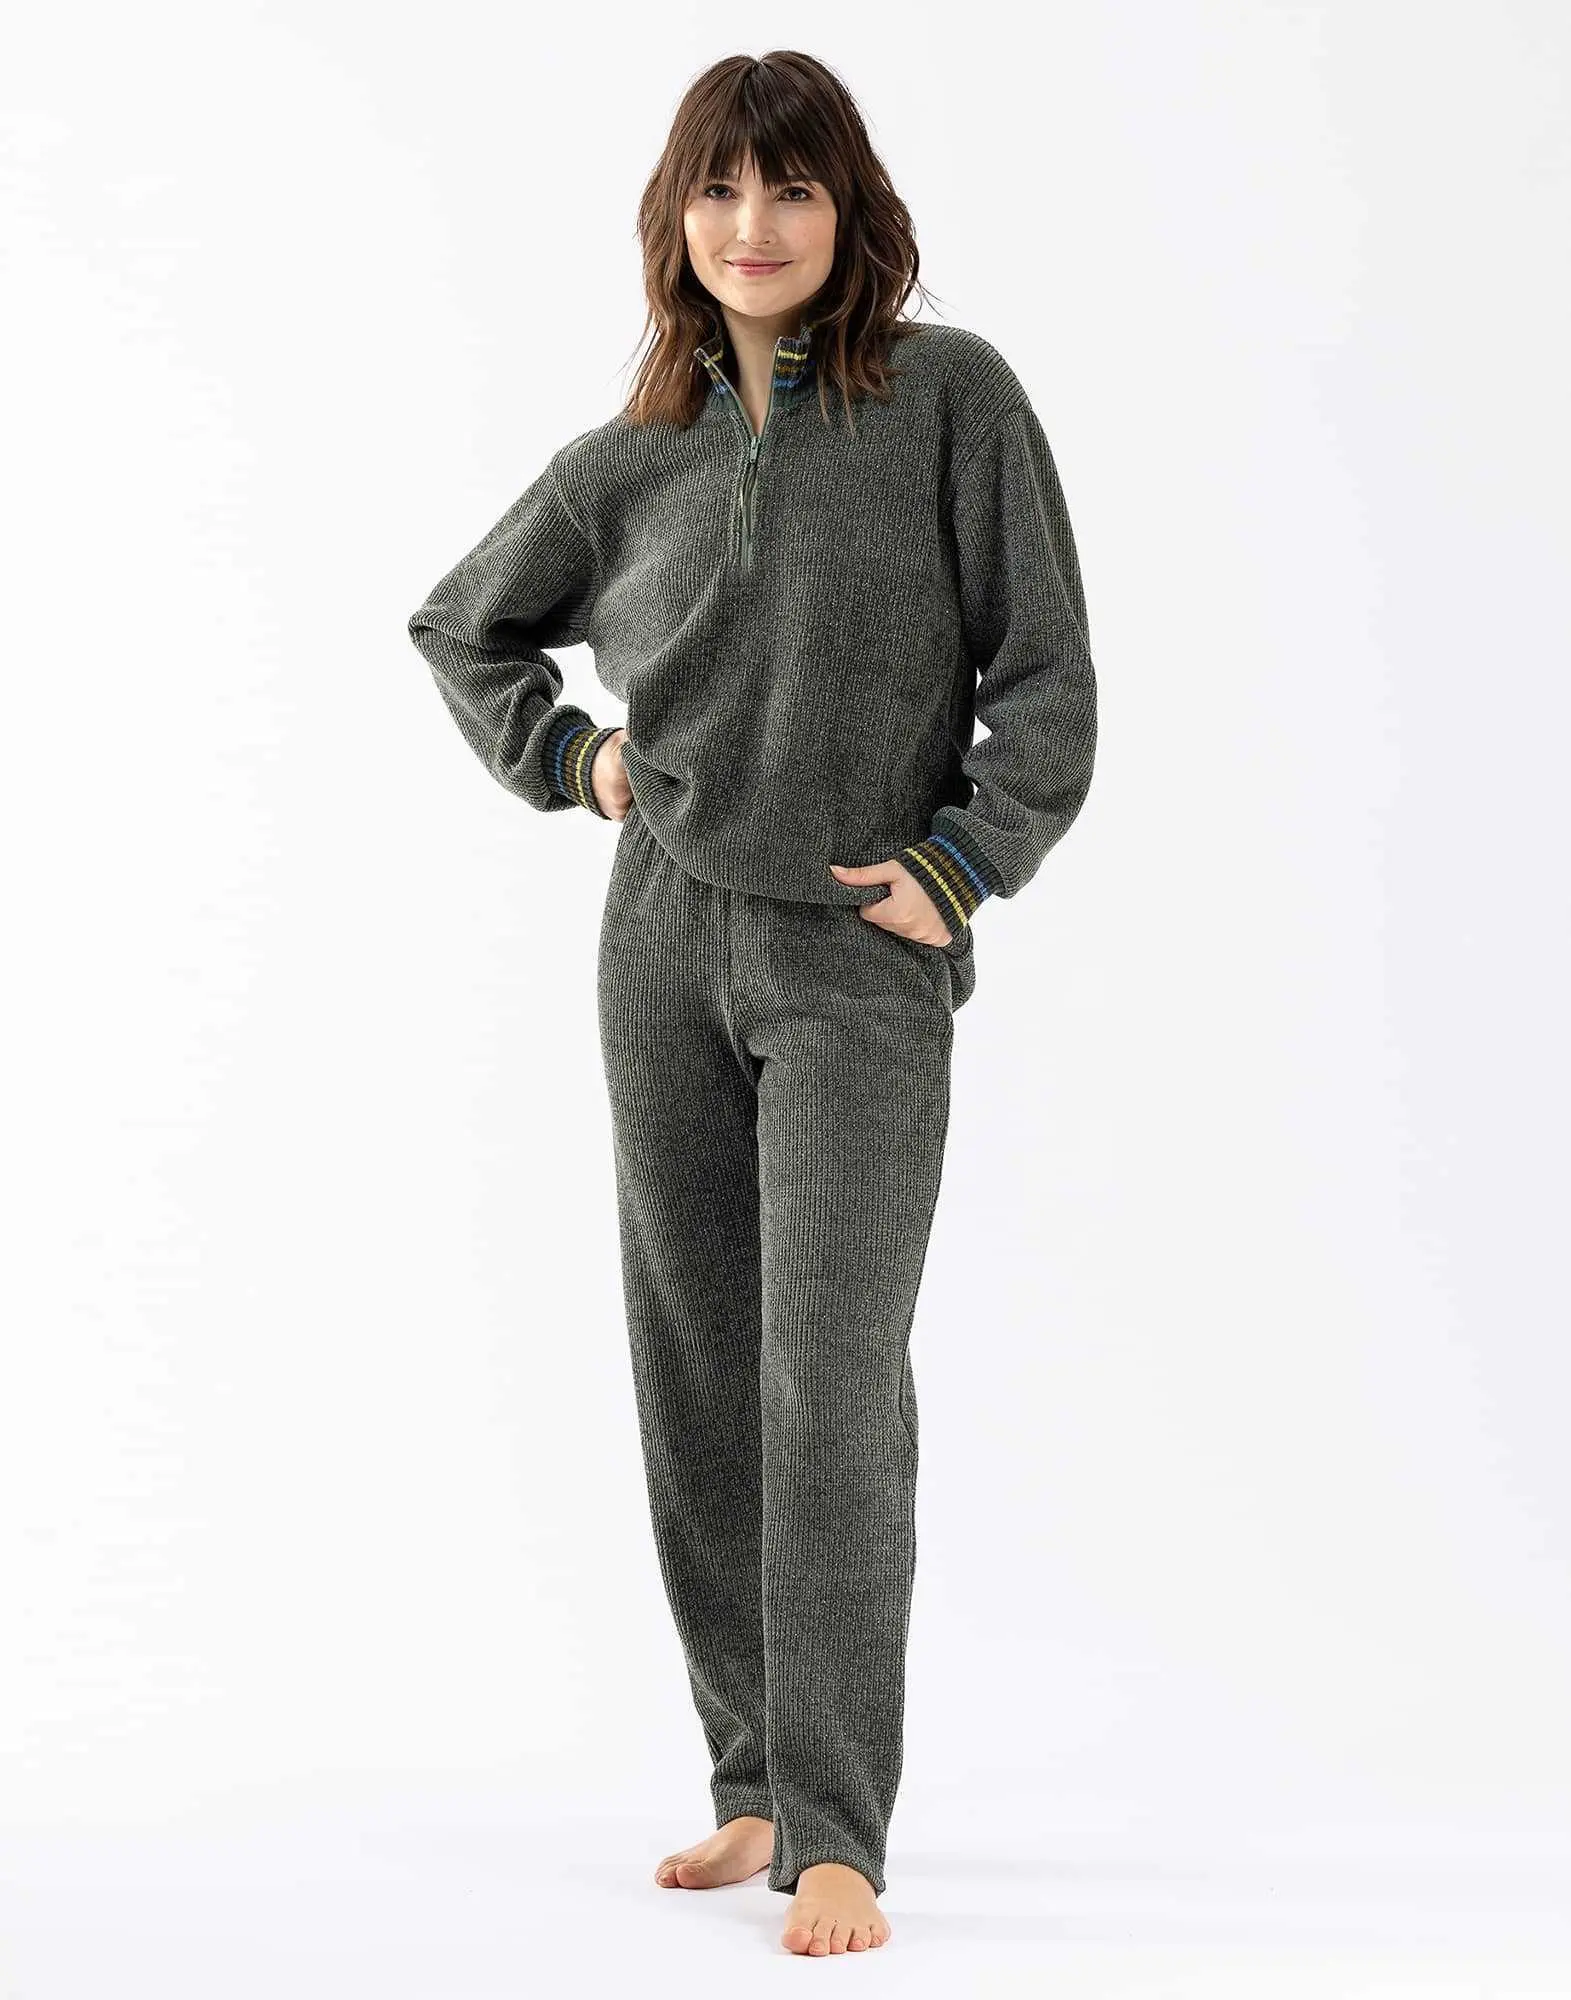 Tracksuit in chenille knit with lurex ICONIC 602 moss green | Lingerie le Chat